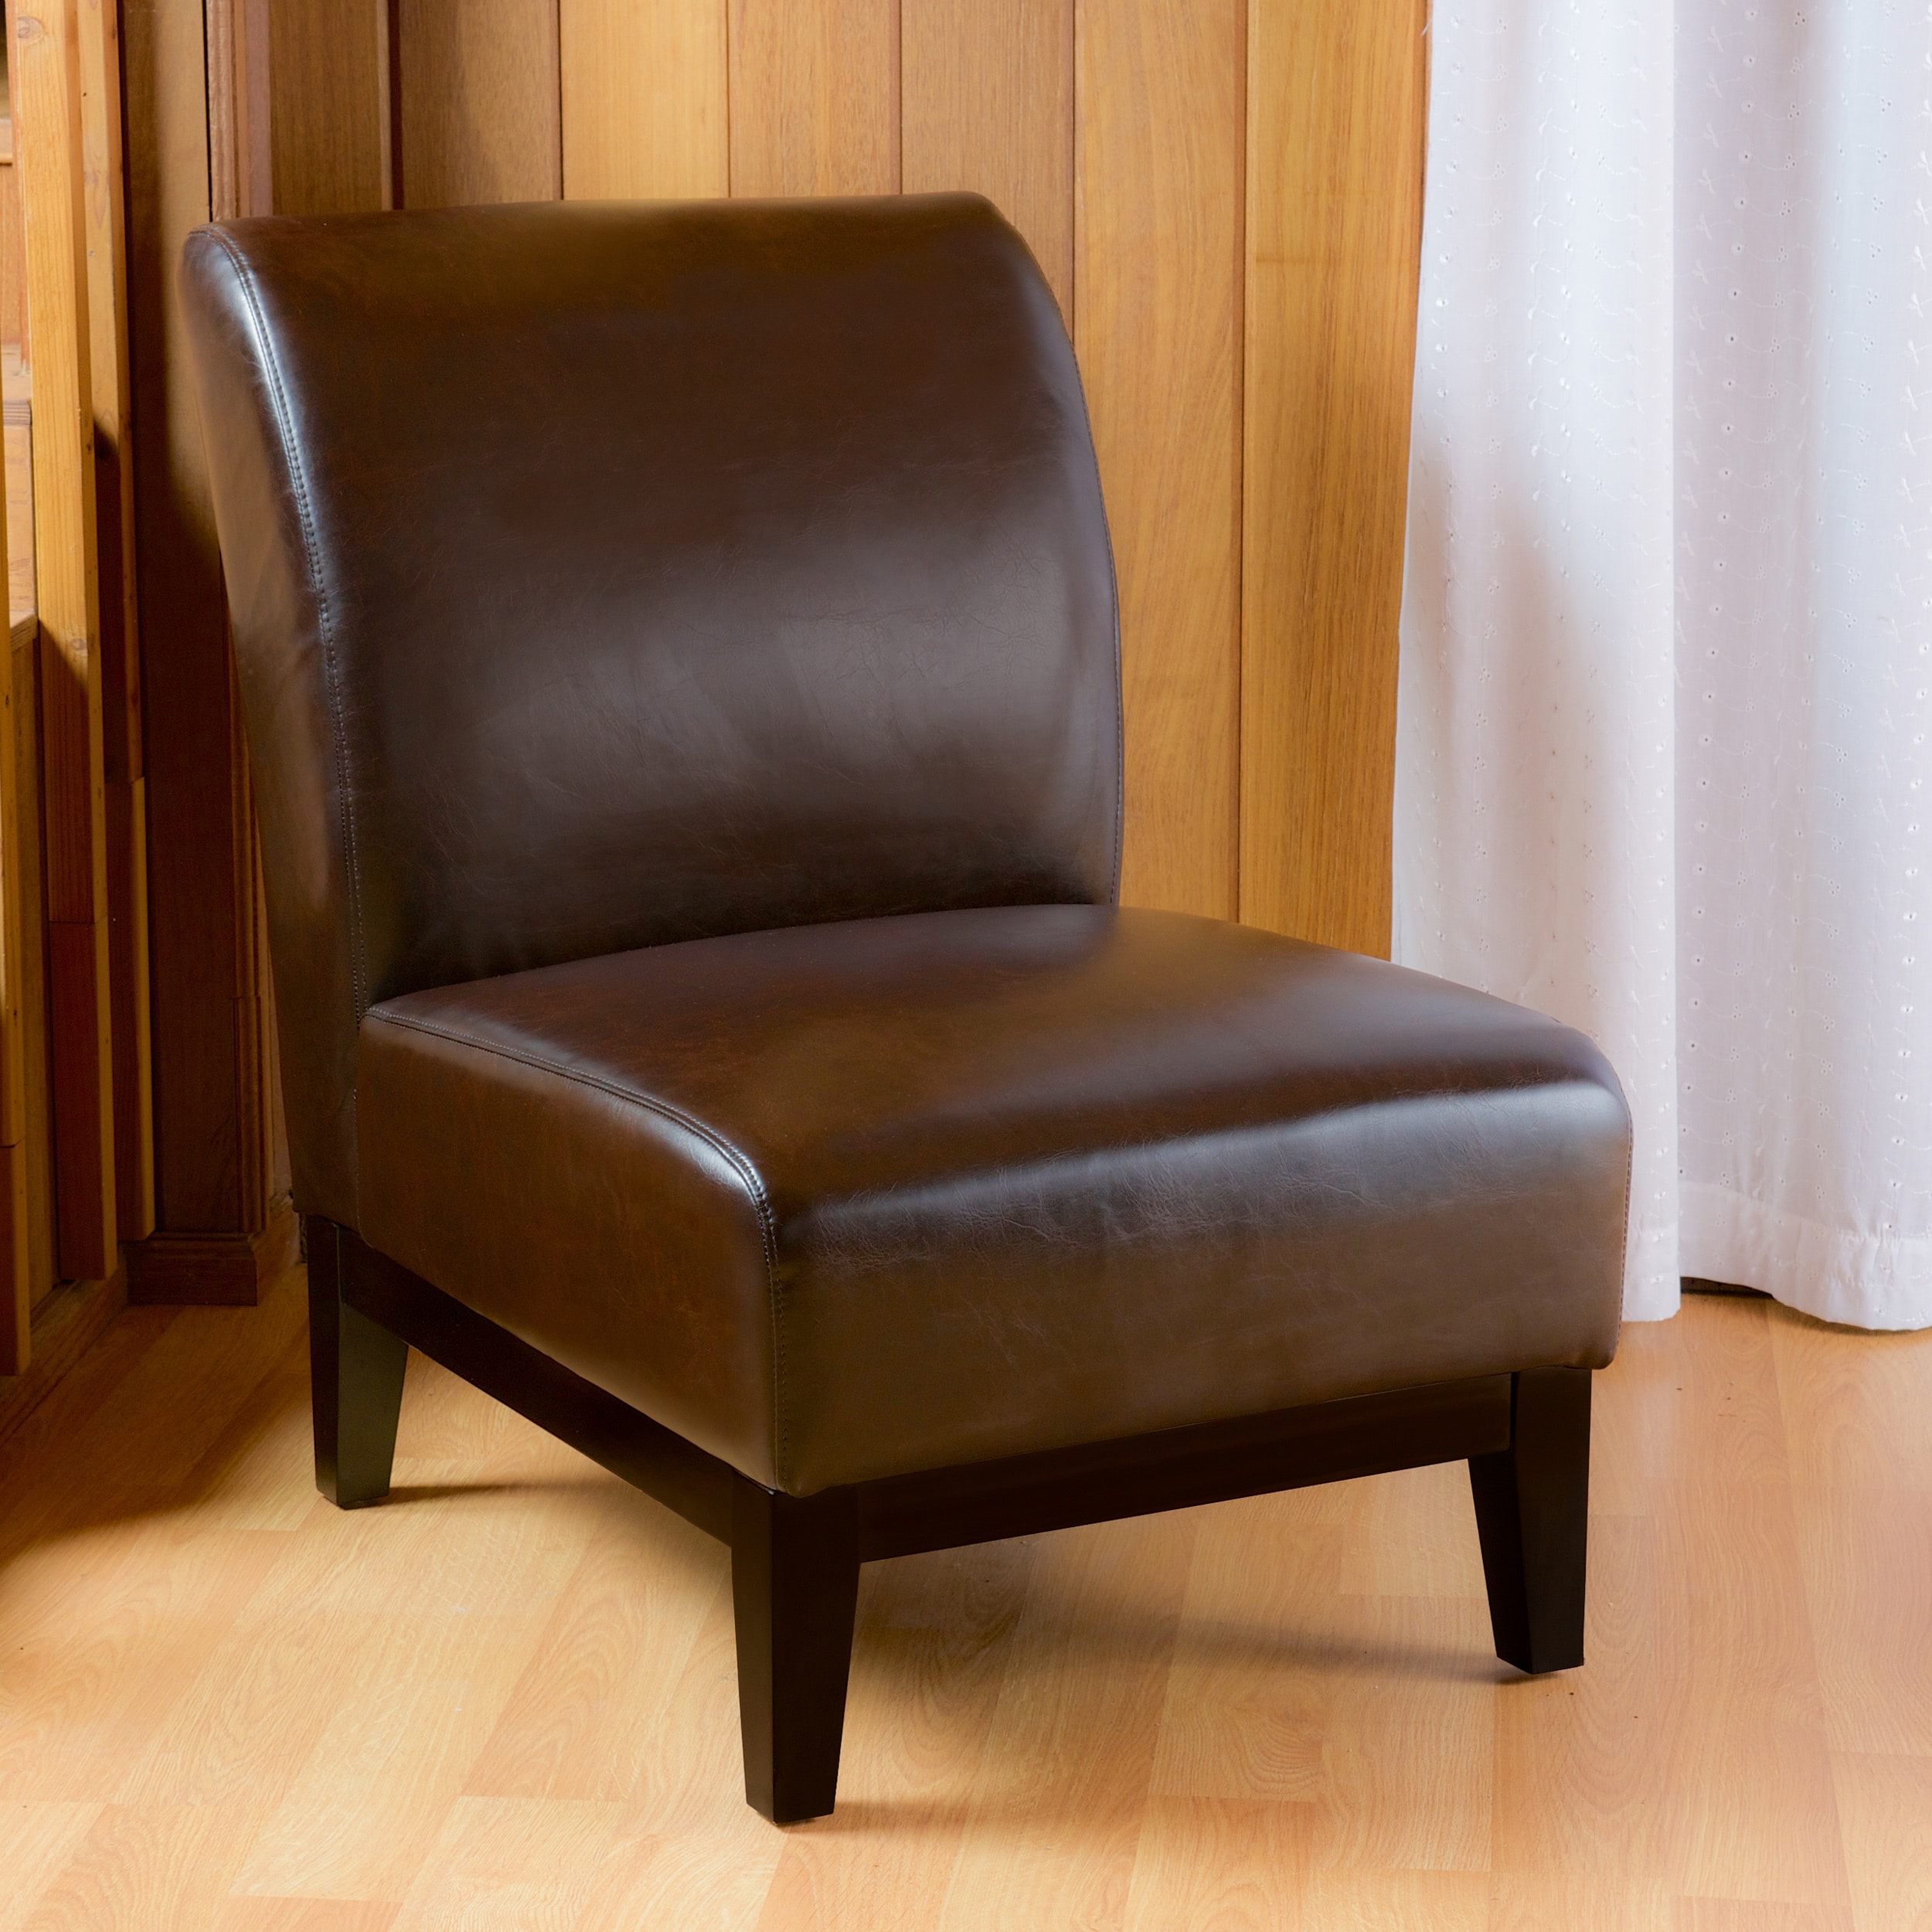 Christopher Knight Home Darcy Brown Leather Slipper Chair (BrownMatching wood legsSome assembly requiredDimensions 35.40 inches high x 24 inches wide x 33.50 inches deepSeat dimensions 17 inches high x 24 inches wide x 23.5 inches deep )